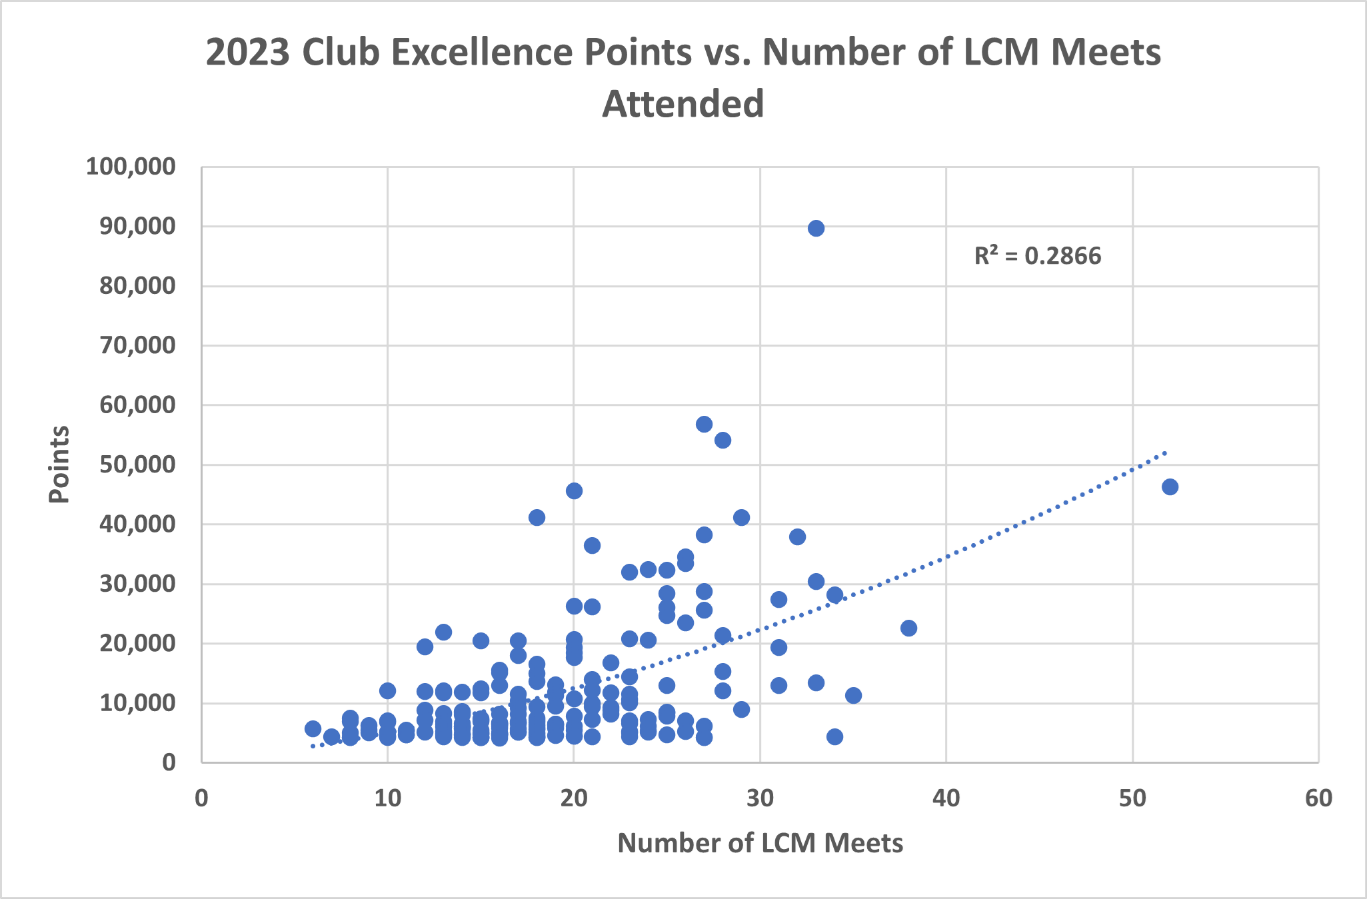 Club Excellence Points vs Number of LCM Meets Attended